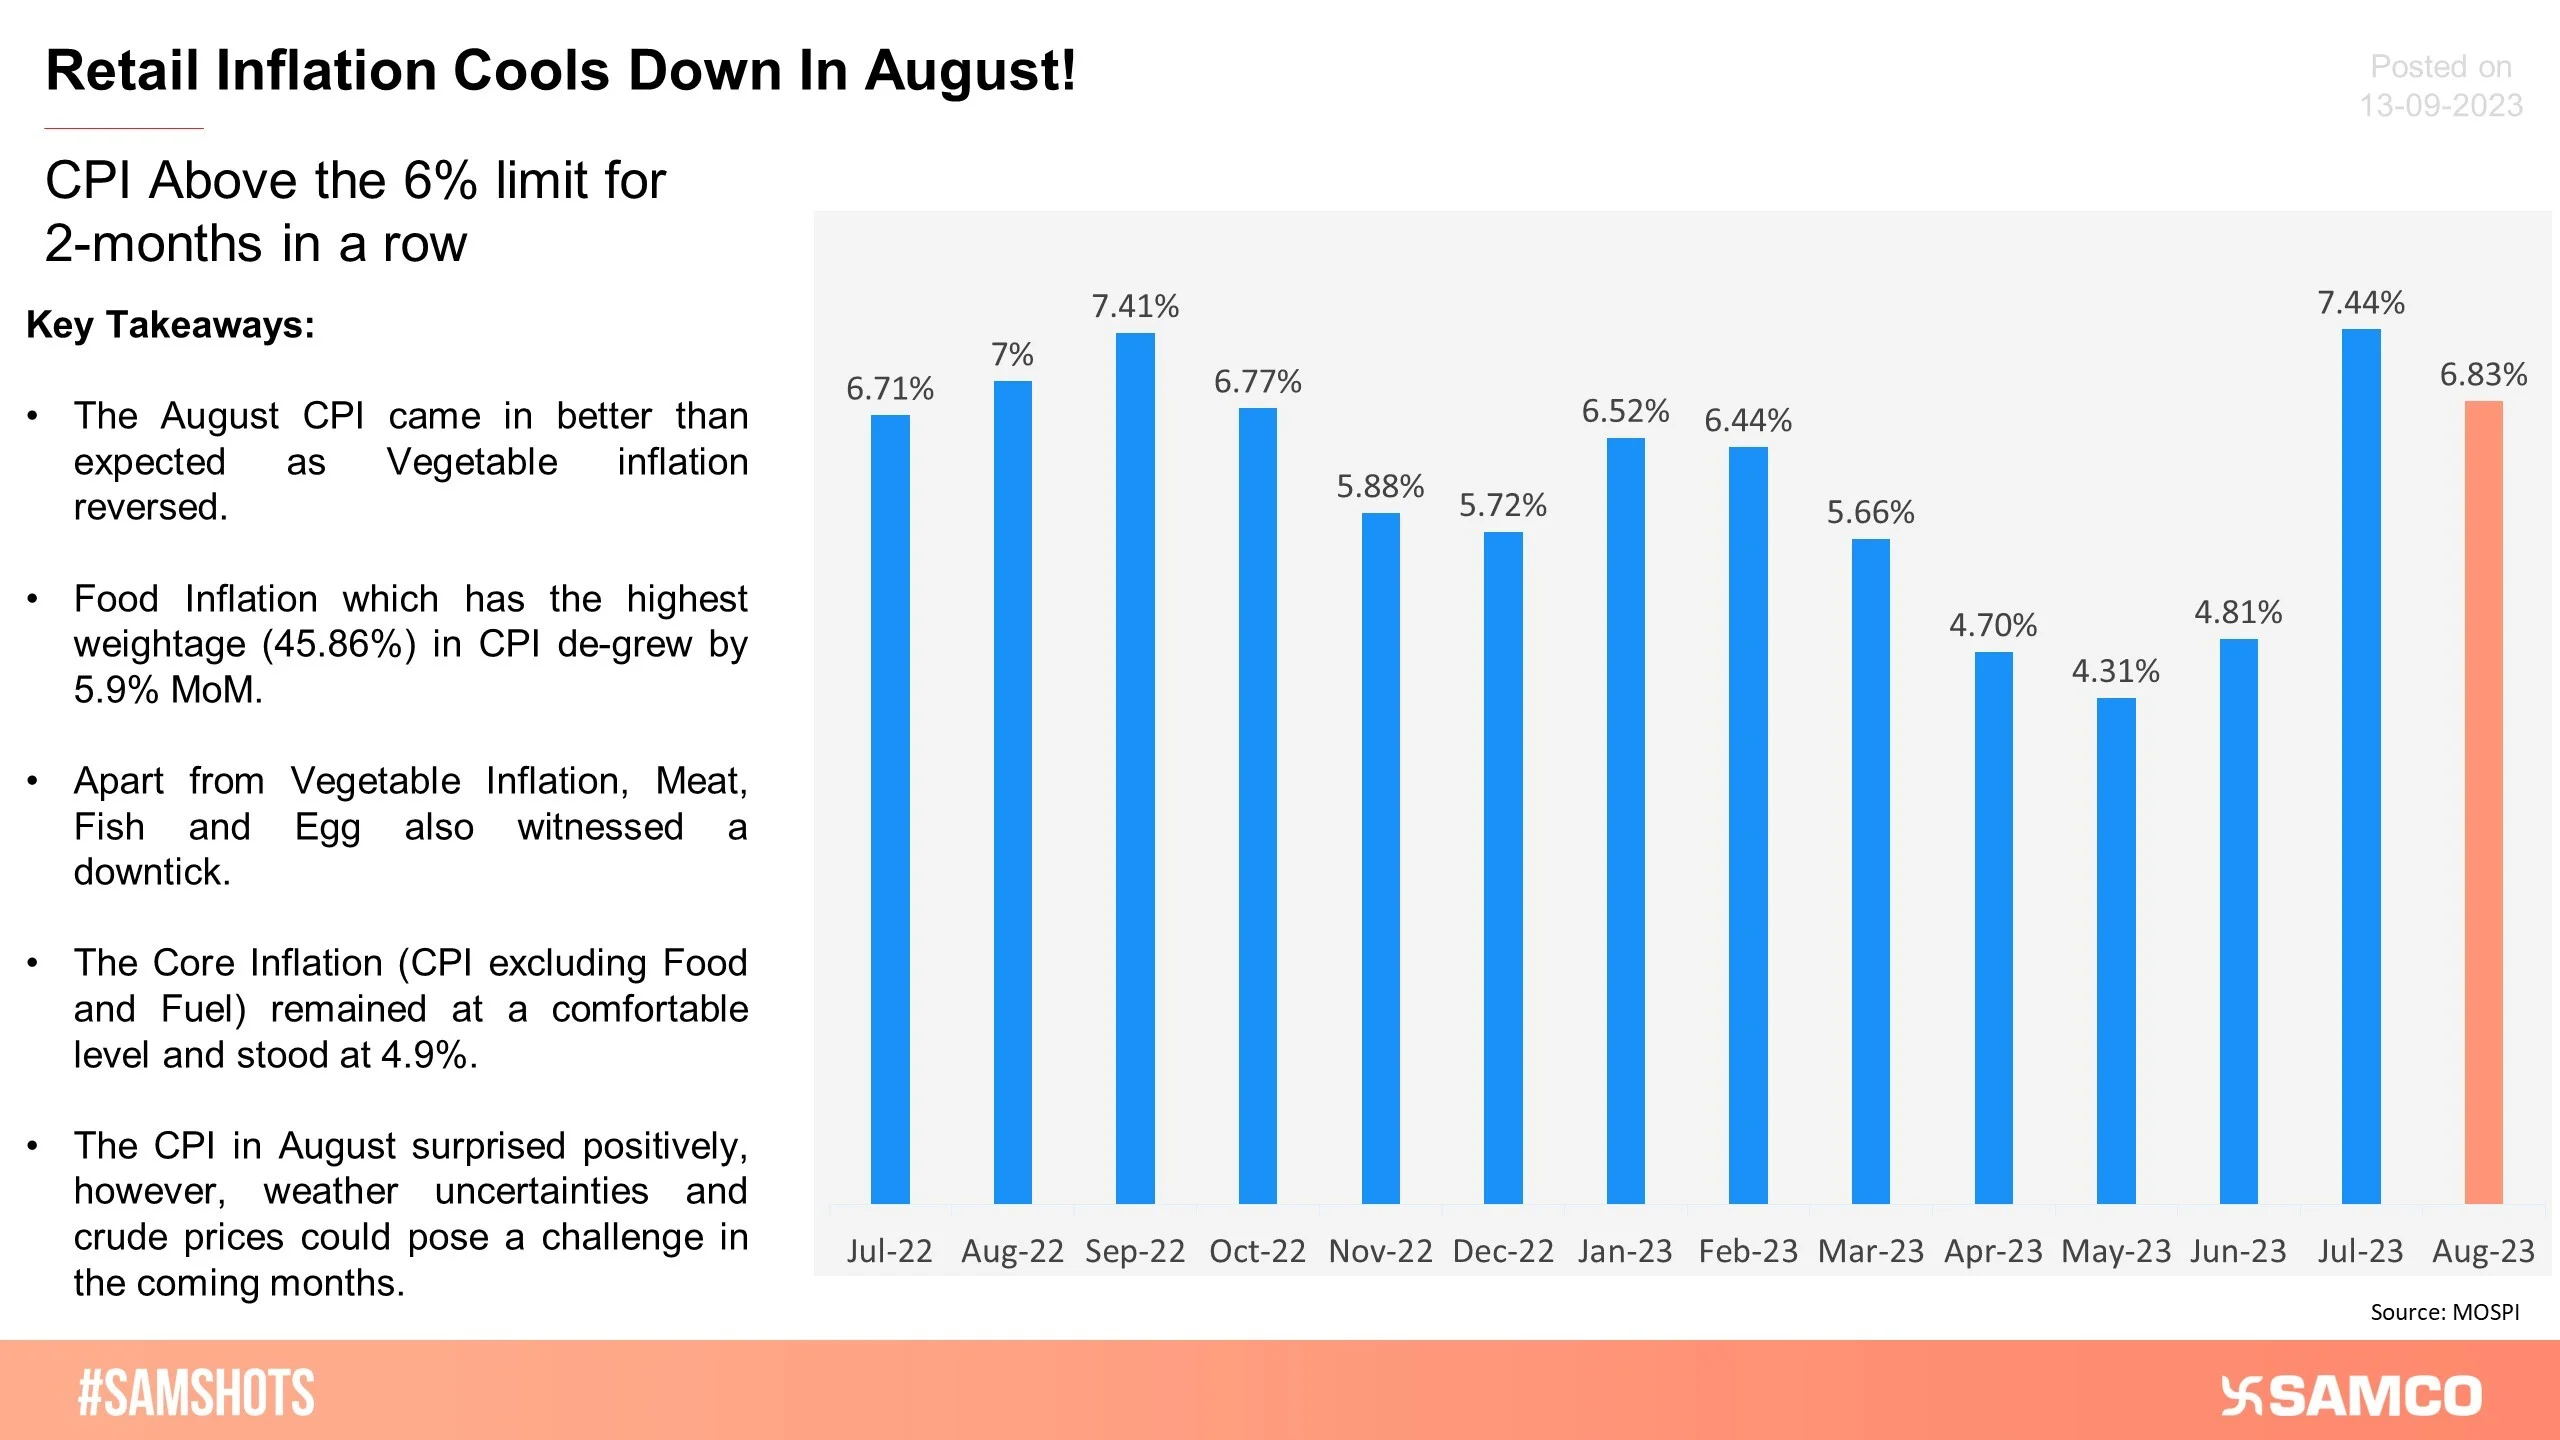 India's Retail Inflation Cools Down In August!